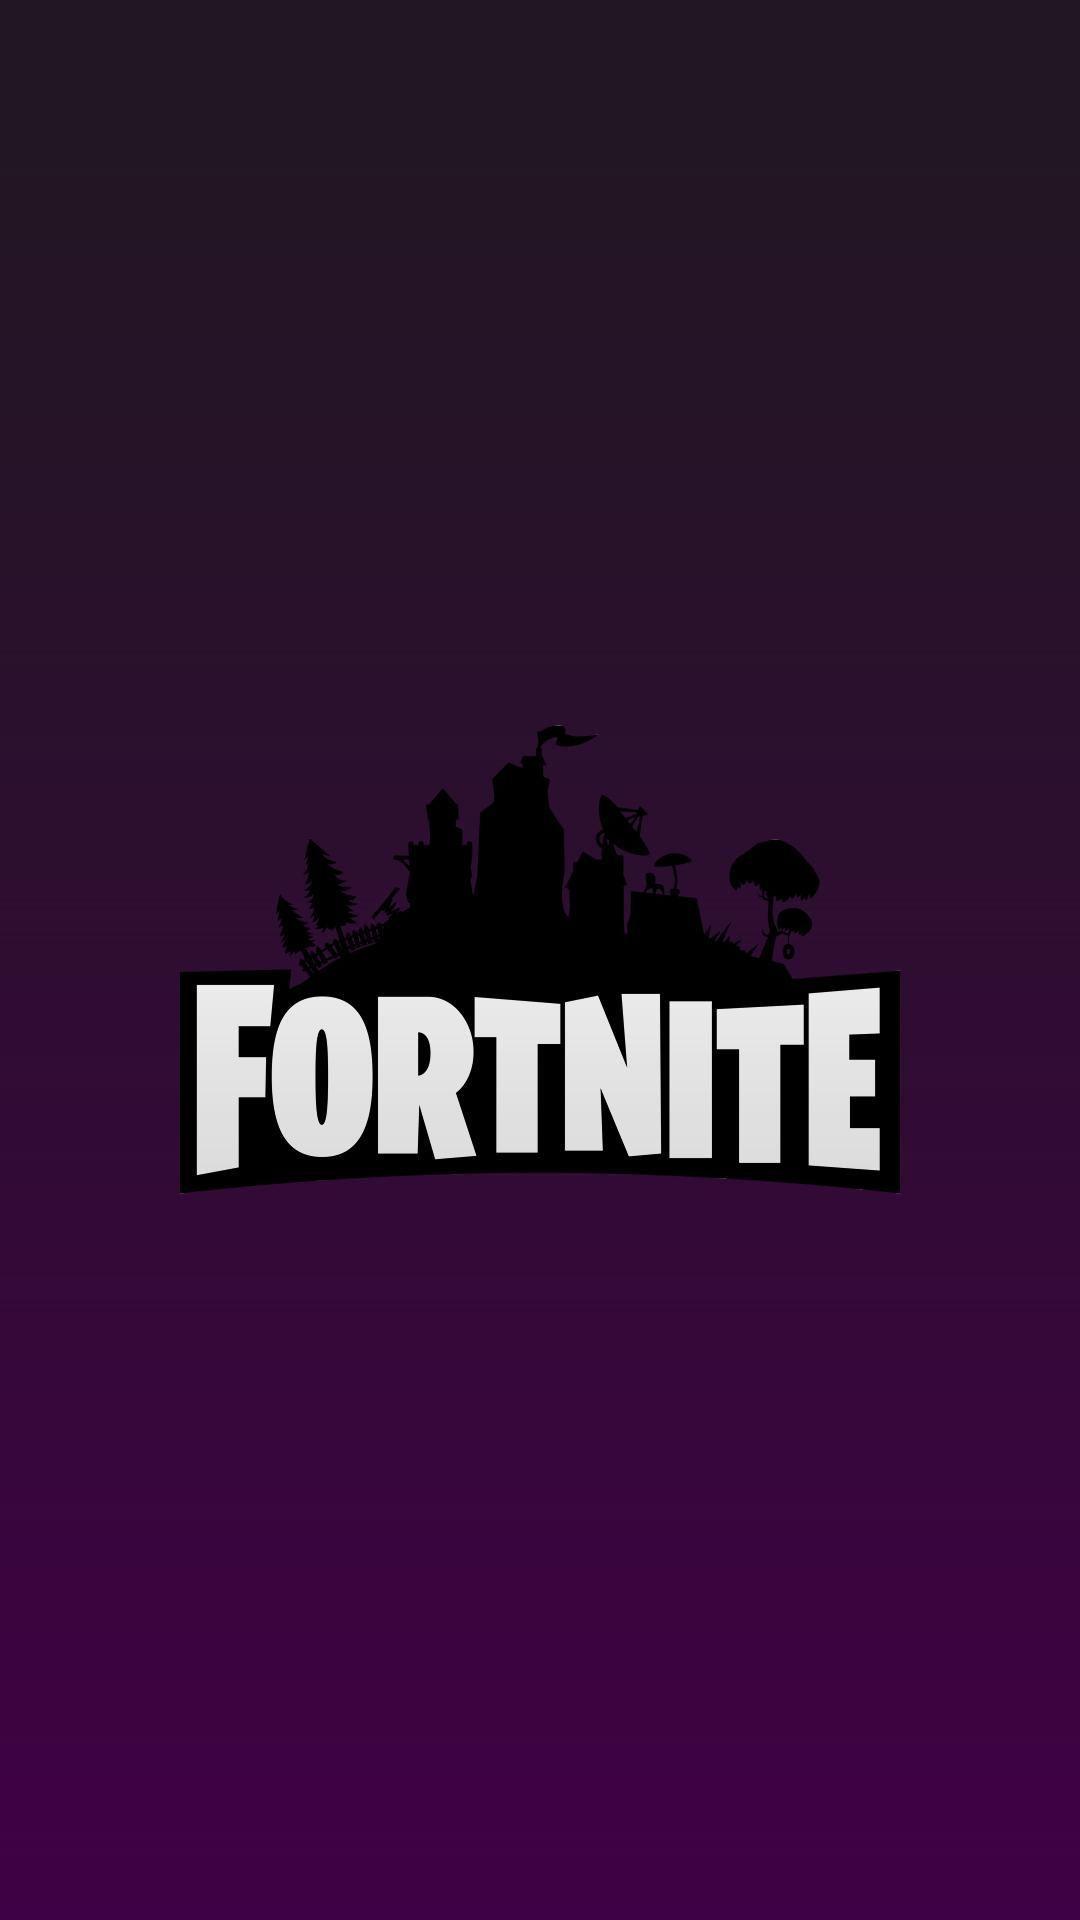 Cool Fortnite Wallpaper HD Resolution For Your Android or iPhone Wallpaper #android #iphone #wall. Gaming wallpaper, Unicorn wallpaper, Android wallpaper